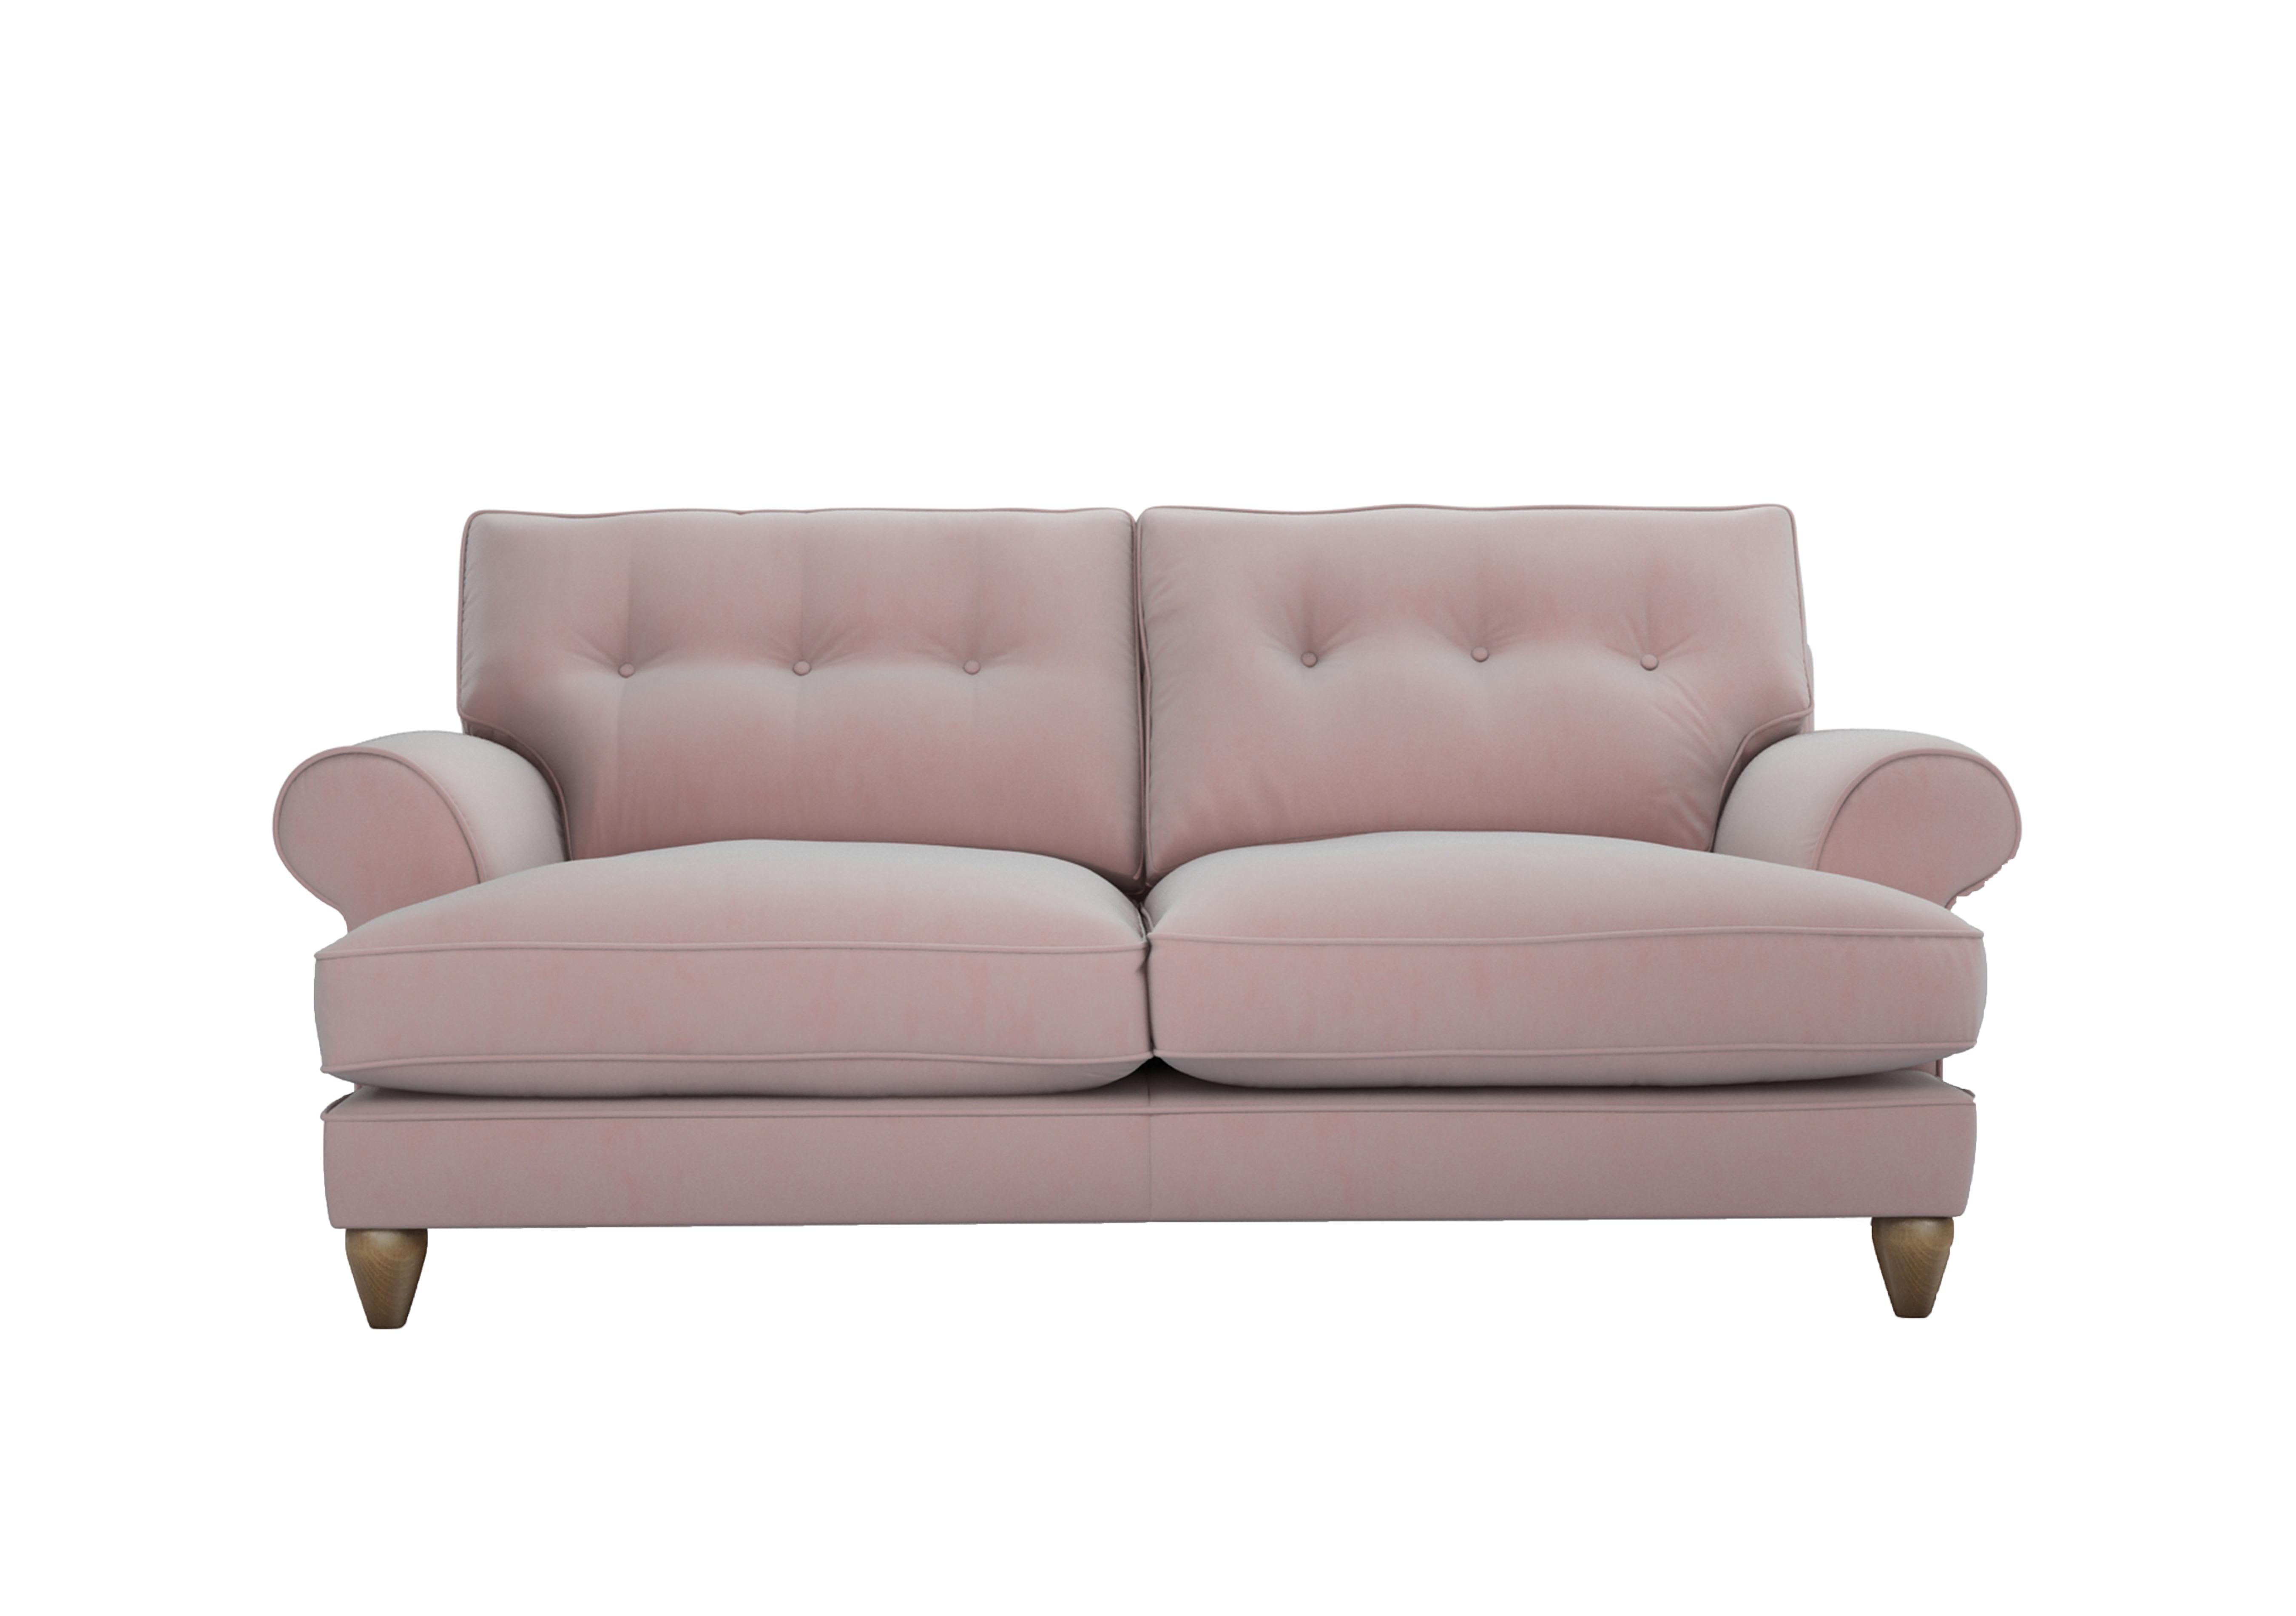 Bronwyn 3 Seater Fabric Classic Back Sofa in Cot256 Cotton Candy on Furniture Village